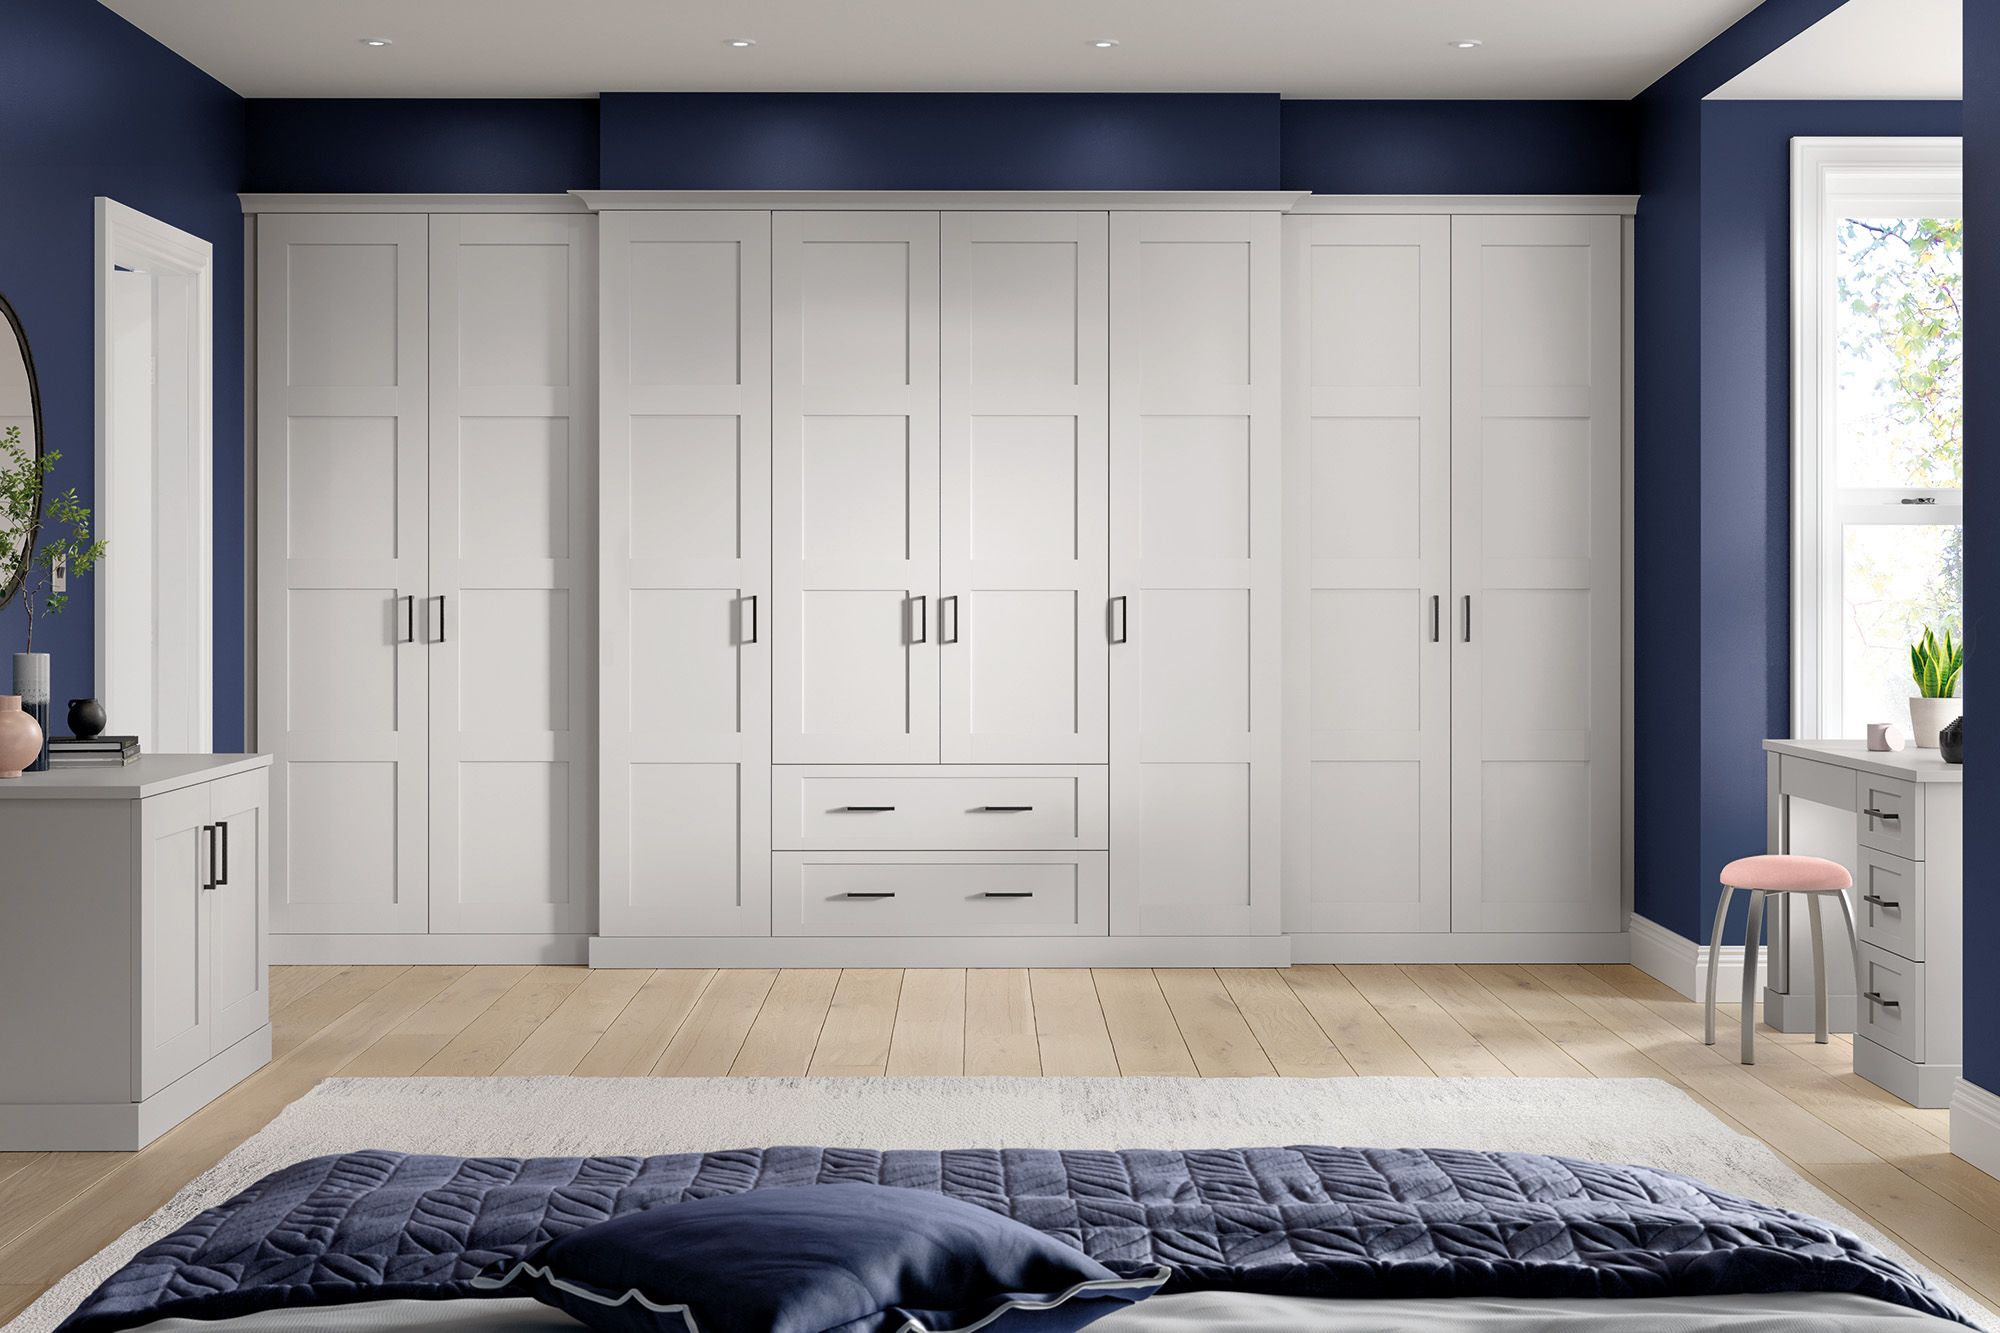 Luxury Fitted Bedroom Furniture & Fitted Wardrobes | Strachan With Built In Wardrobes (View 10 of 15)